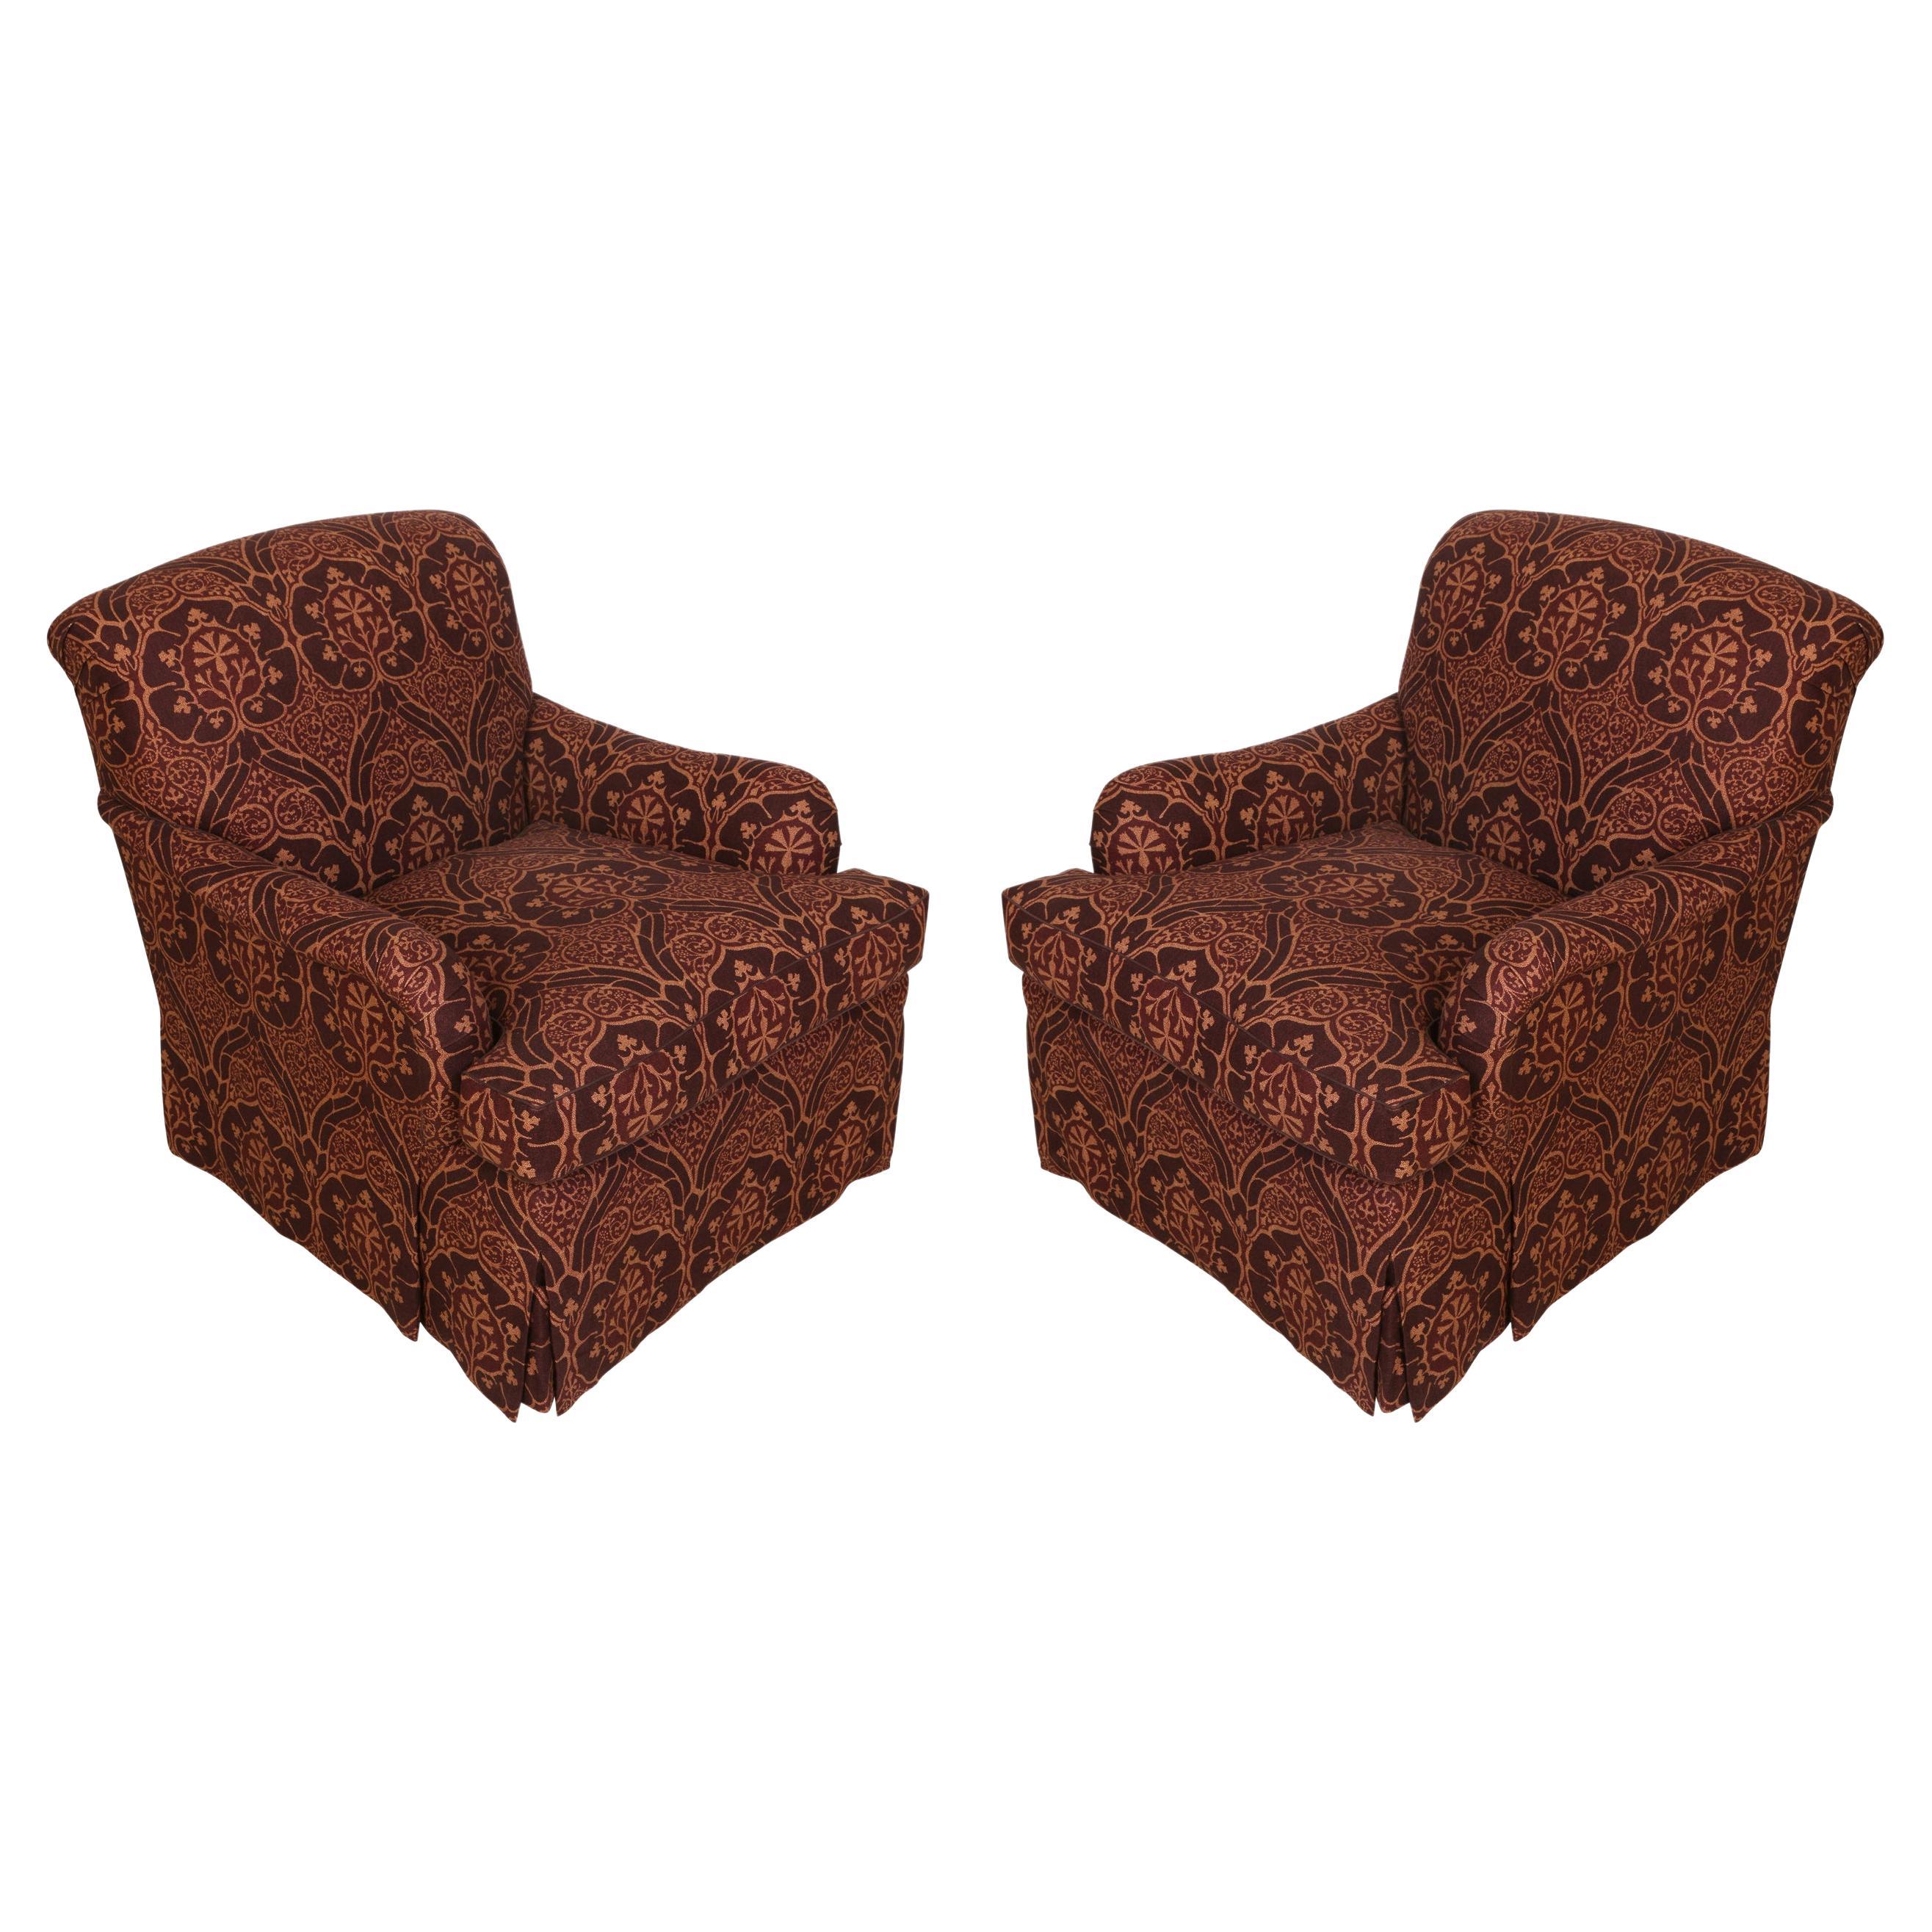 Pair of Jonas Burgundy and Gold Upholstered Club Chairs